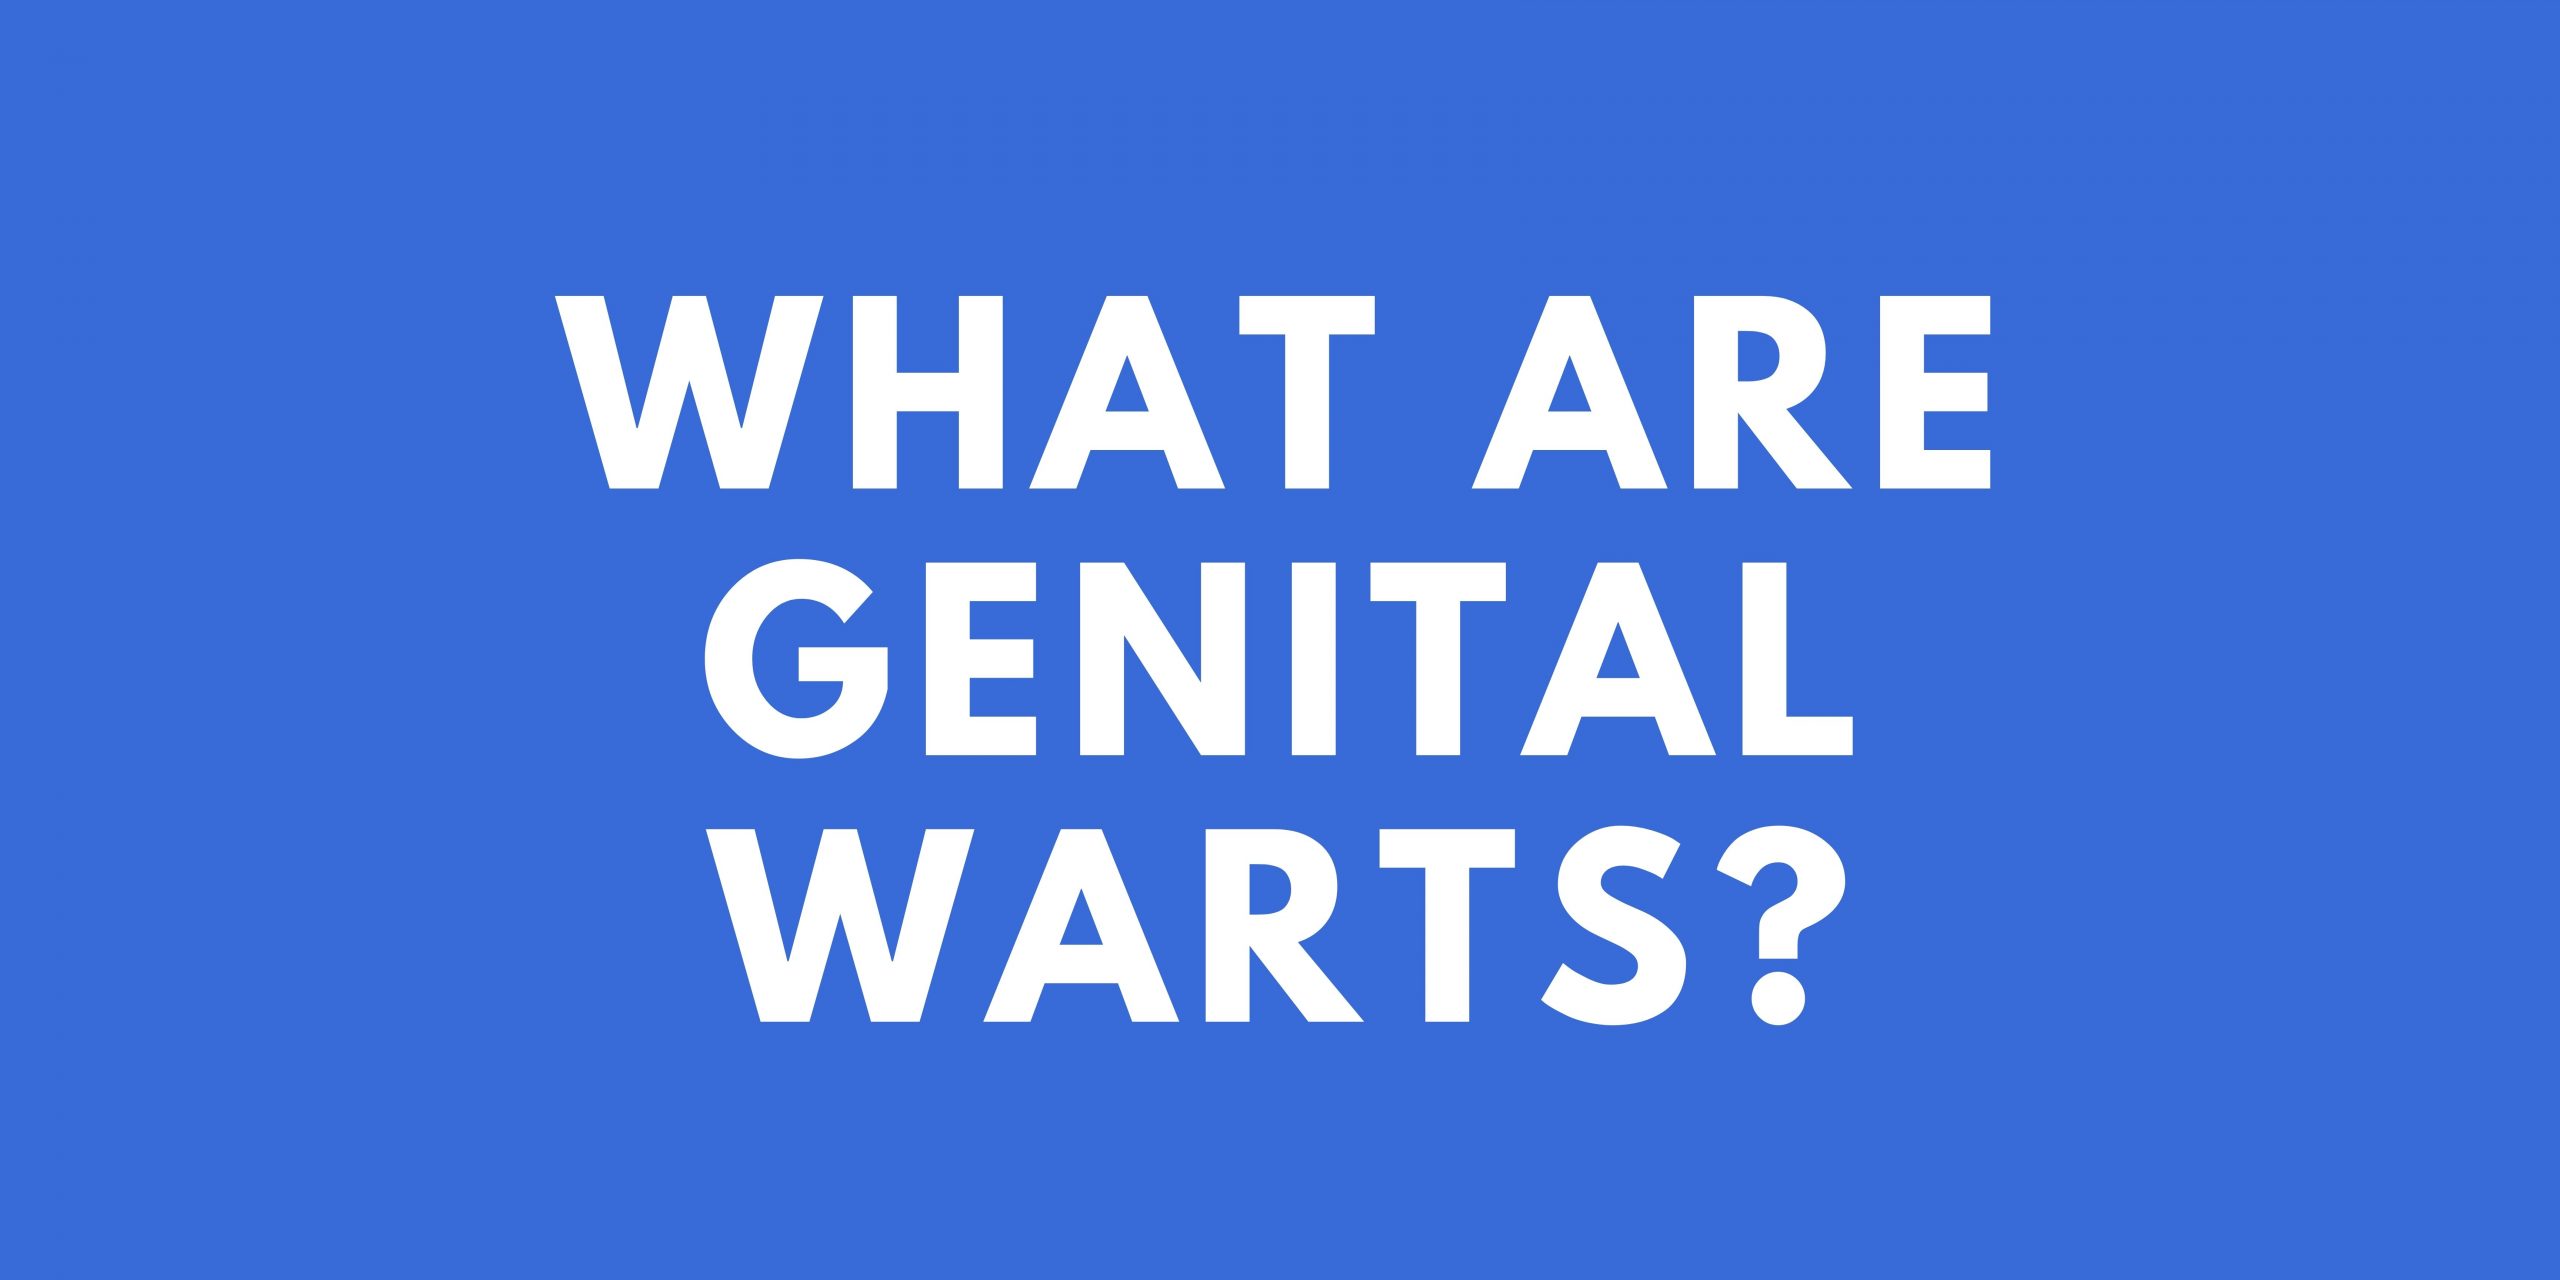 WHAT ARE GENITAL WARTS